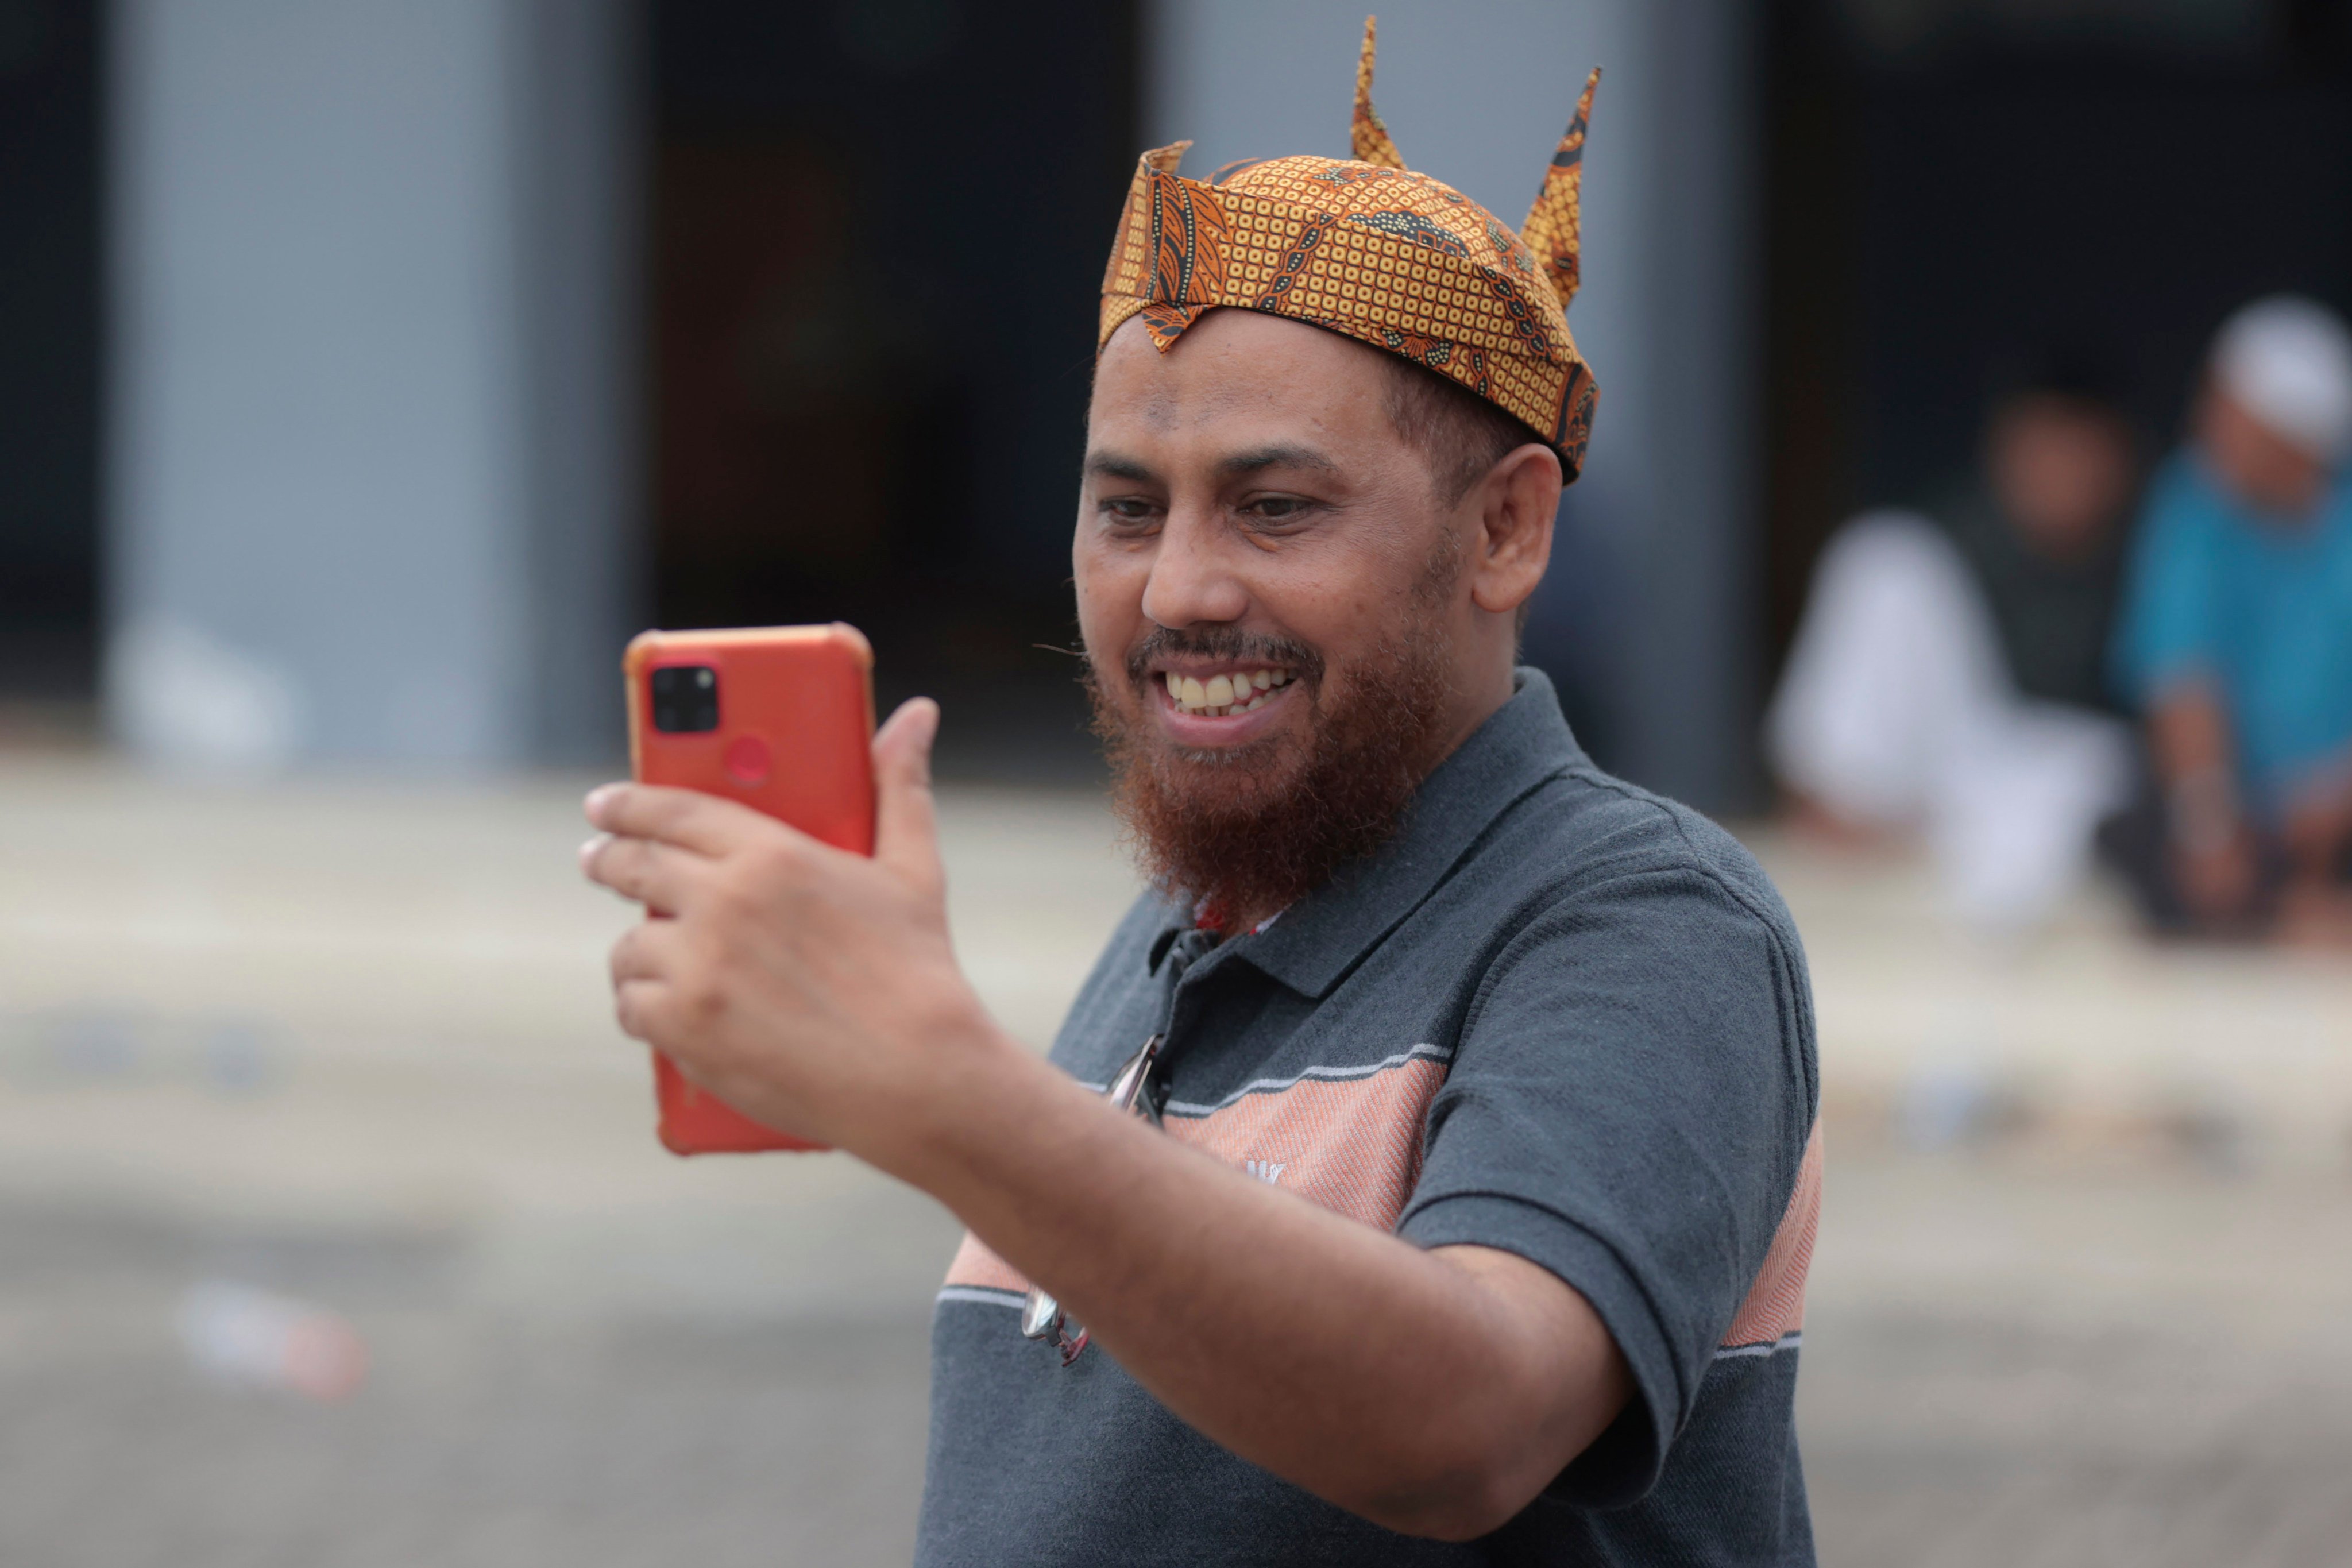 Hisyam bin Alizein, better known by his nom de guerre Umar Patek, makes a video call on Tuesday in Lamongan, Indonesia. Photo: AP